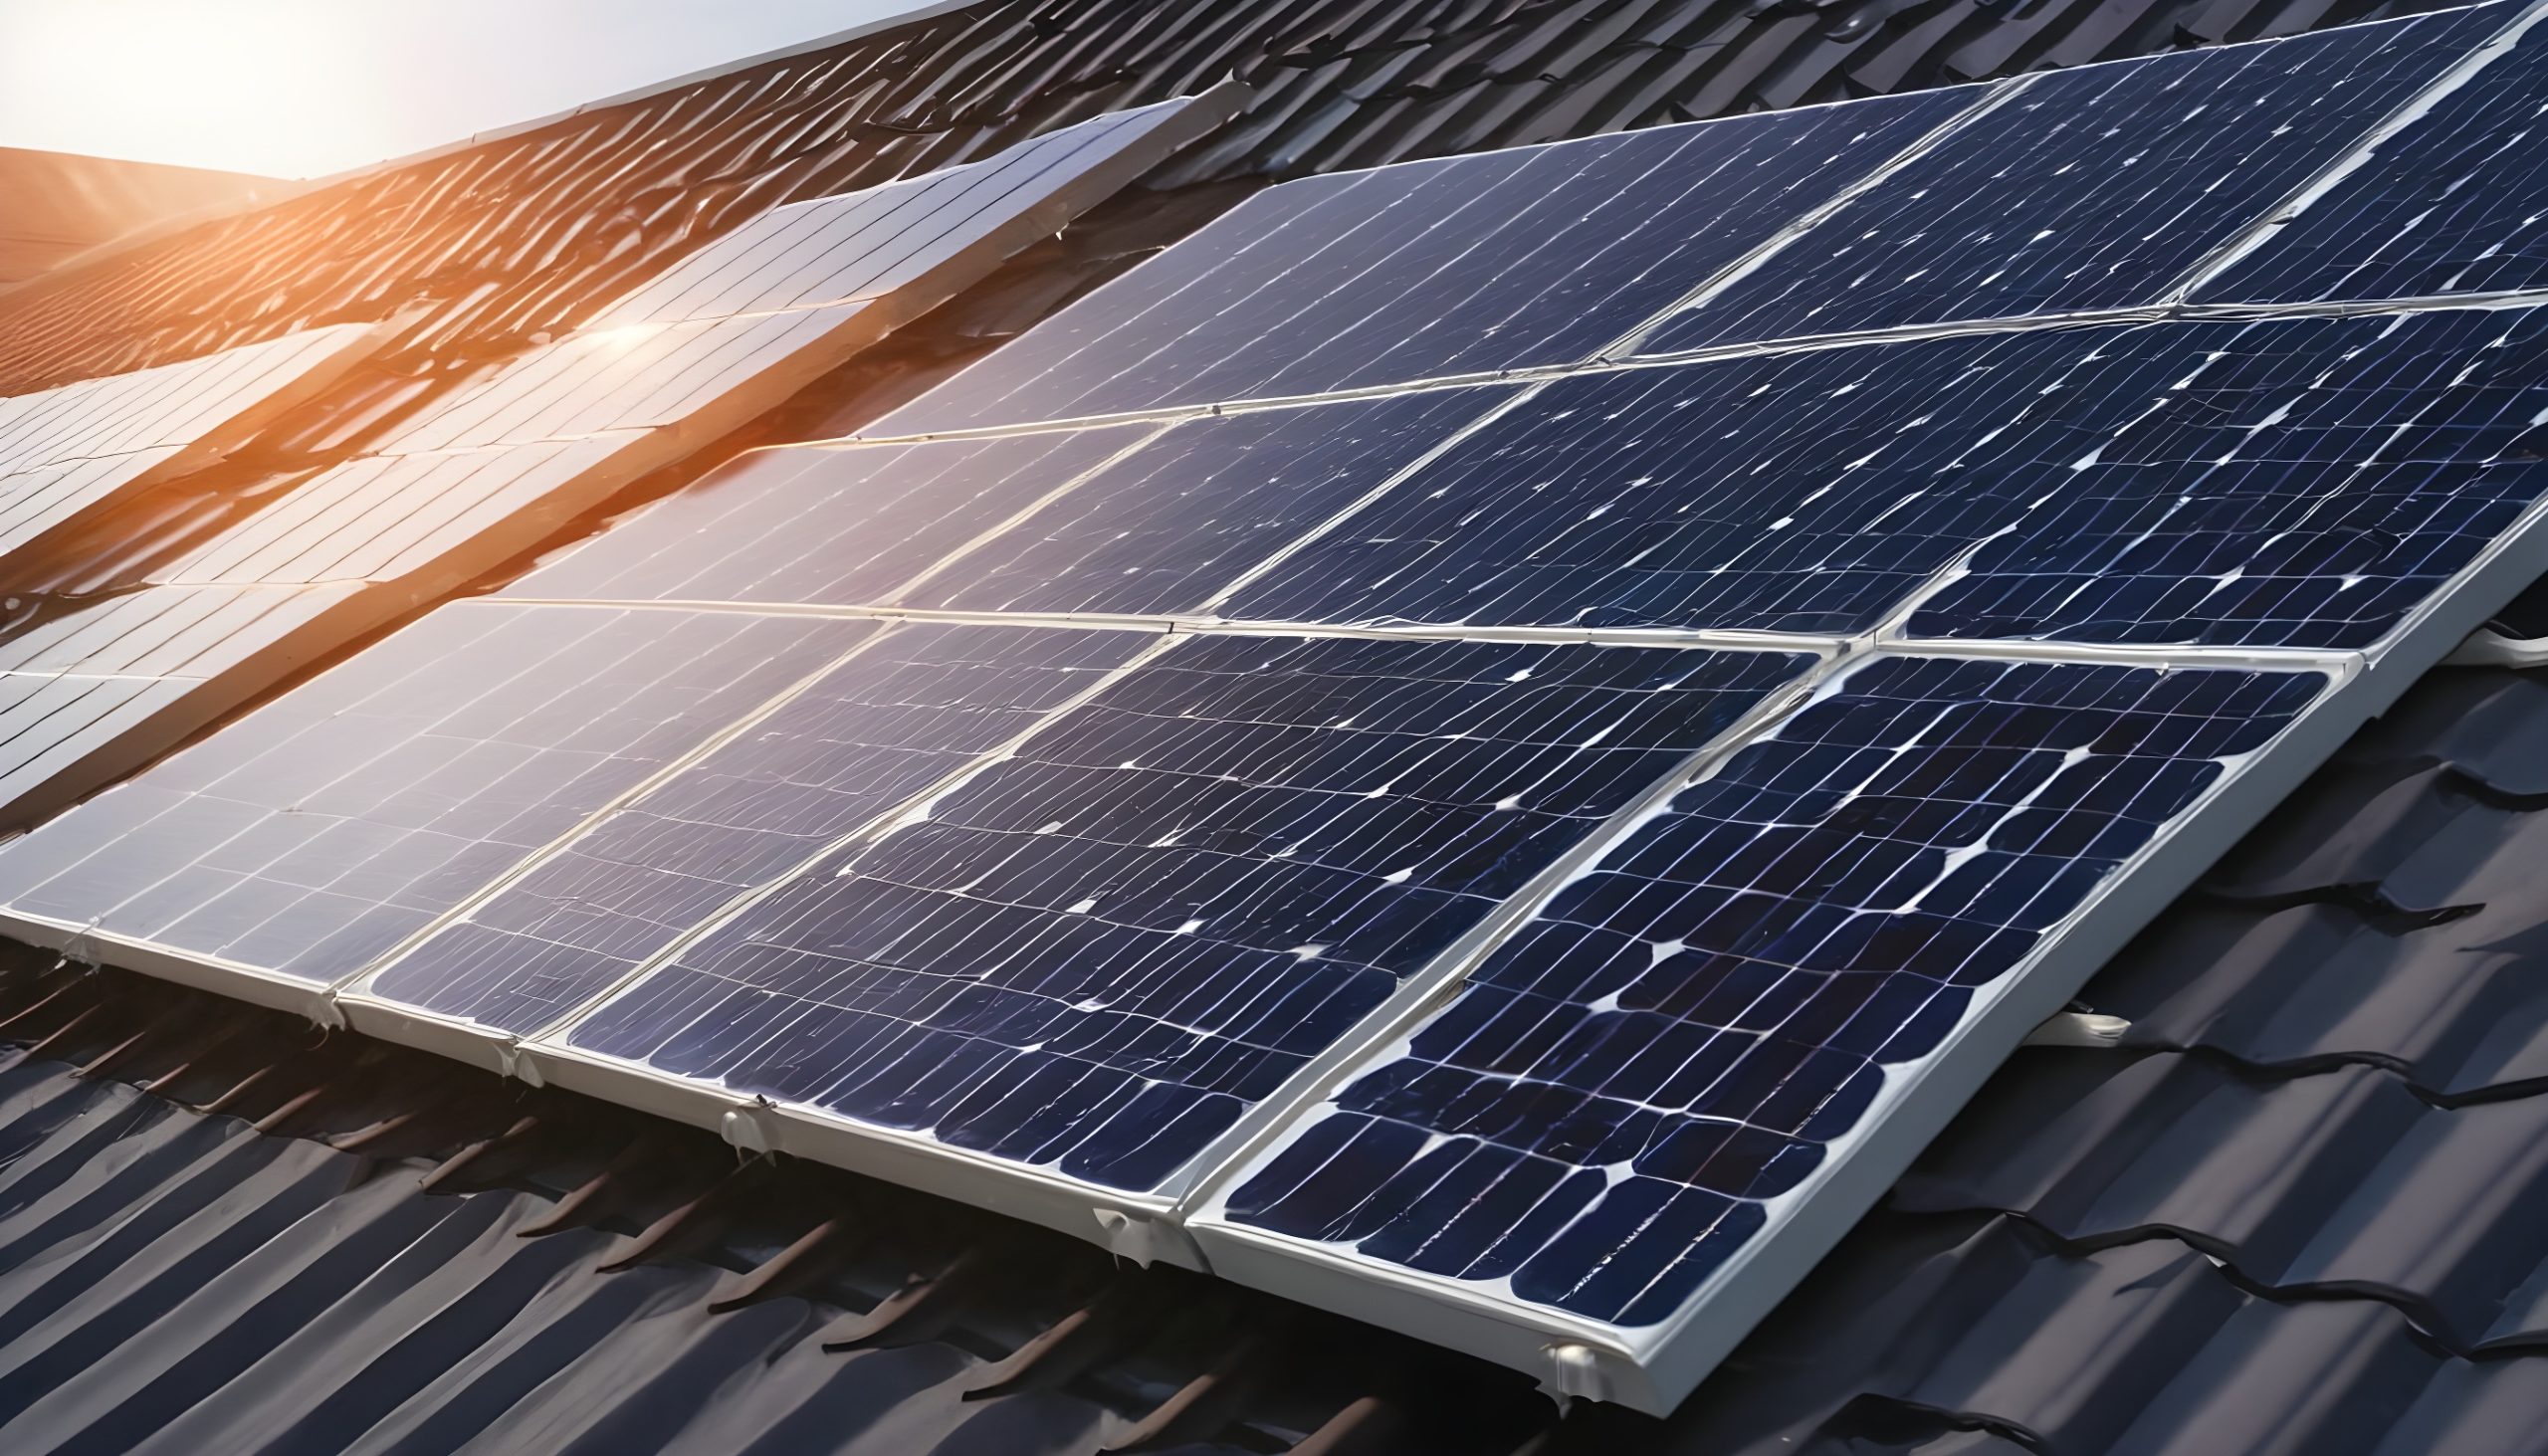 "Discover the ins and outs of solar panel installation with expert tips and practical advice. Learn how to harness the power of the sun efficiently. "